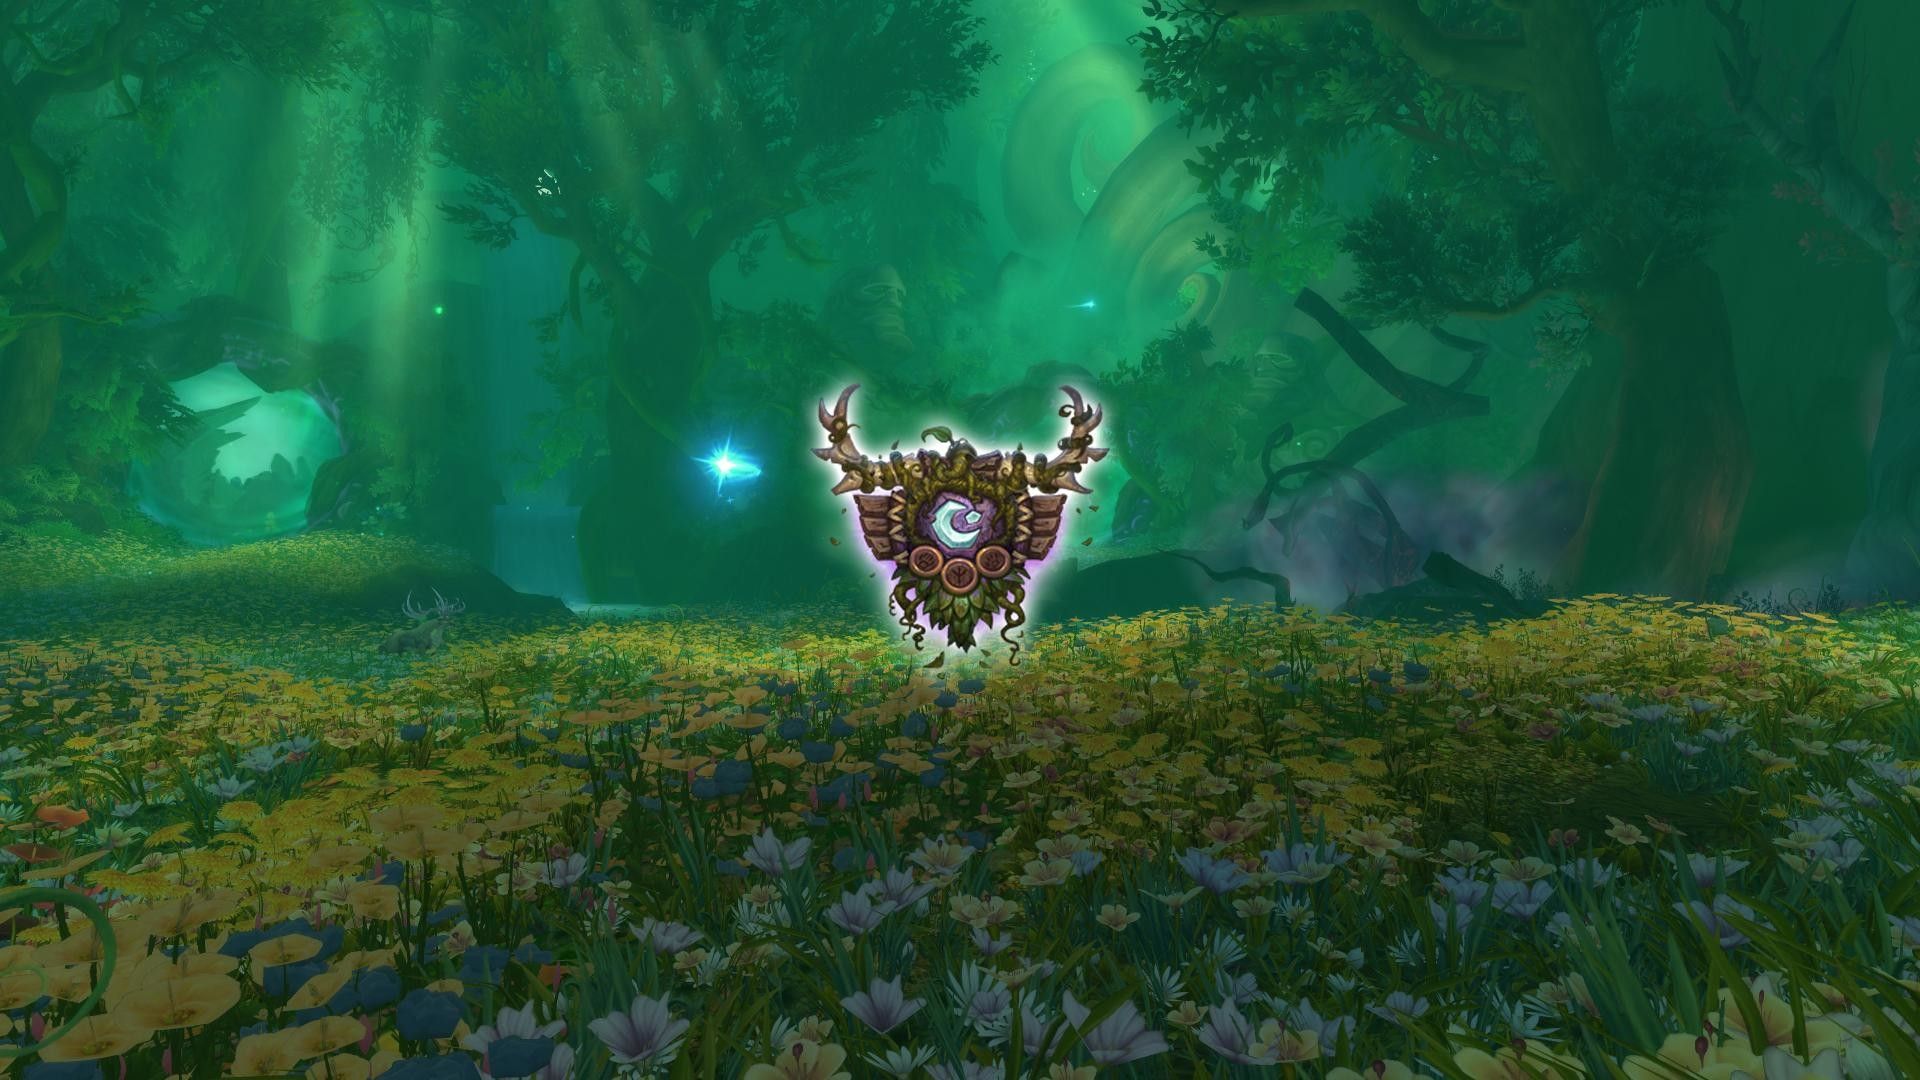 world of warcraft druid Wallpapers